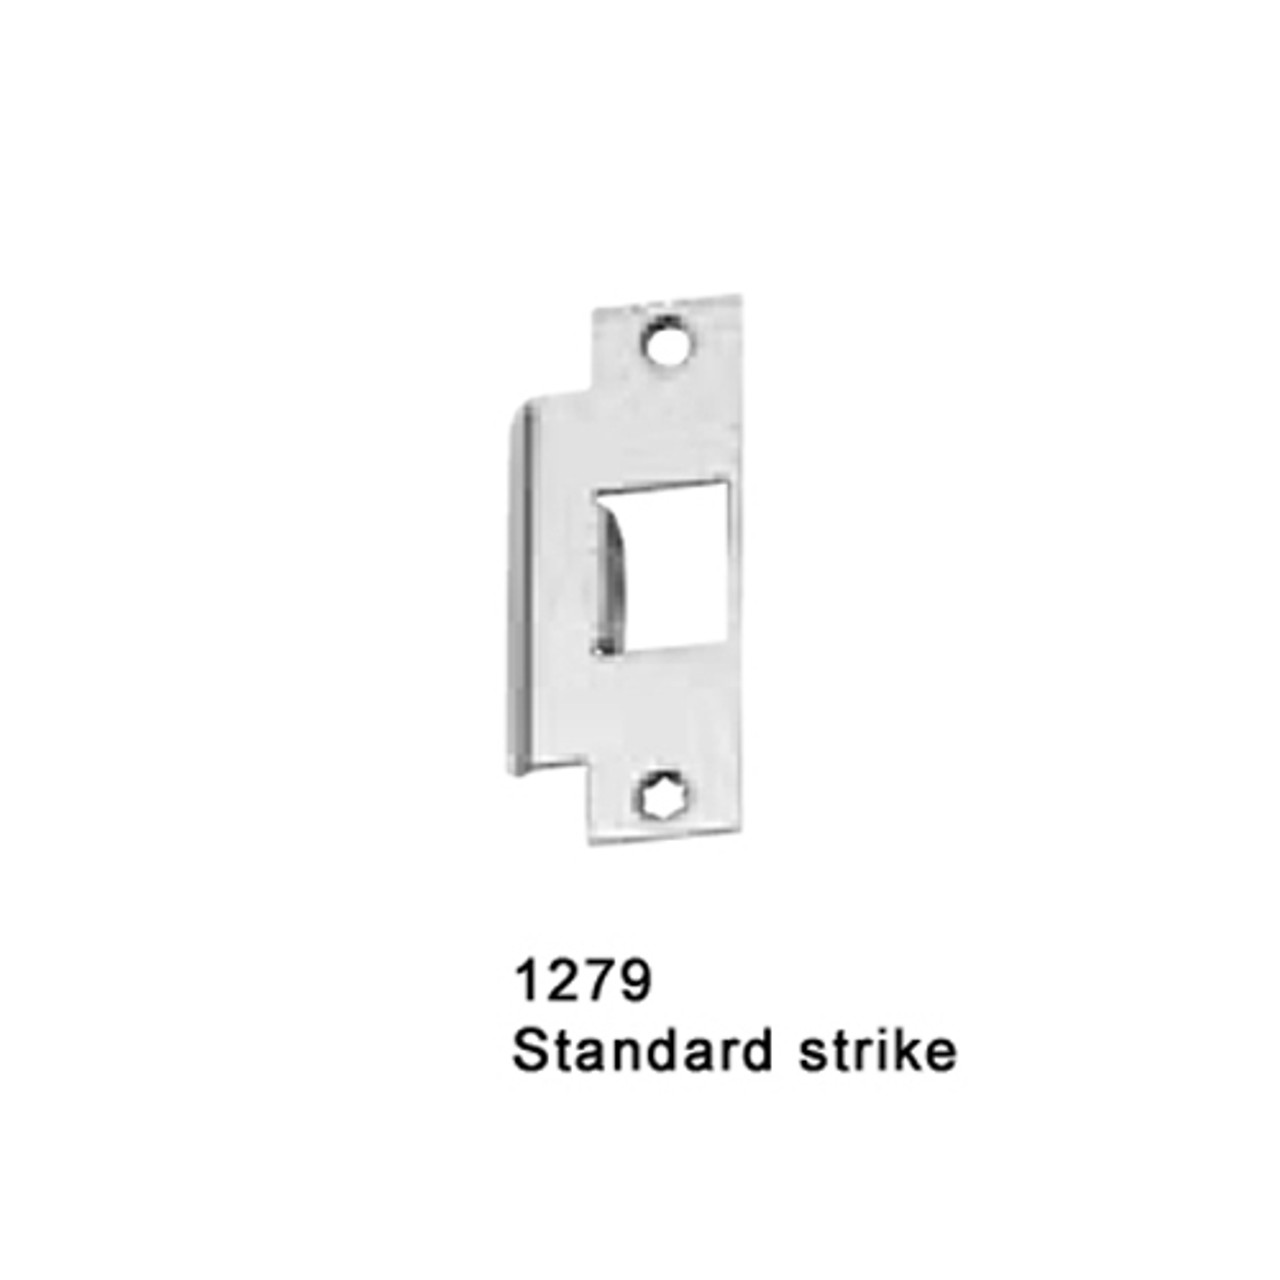 CD25-M-DT-US26-4-RHR Falcon 25 Series Mortise Lock Devices with 512DT Dummy Trim in Polished Chrome